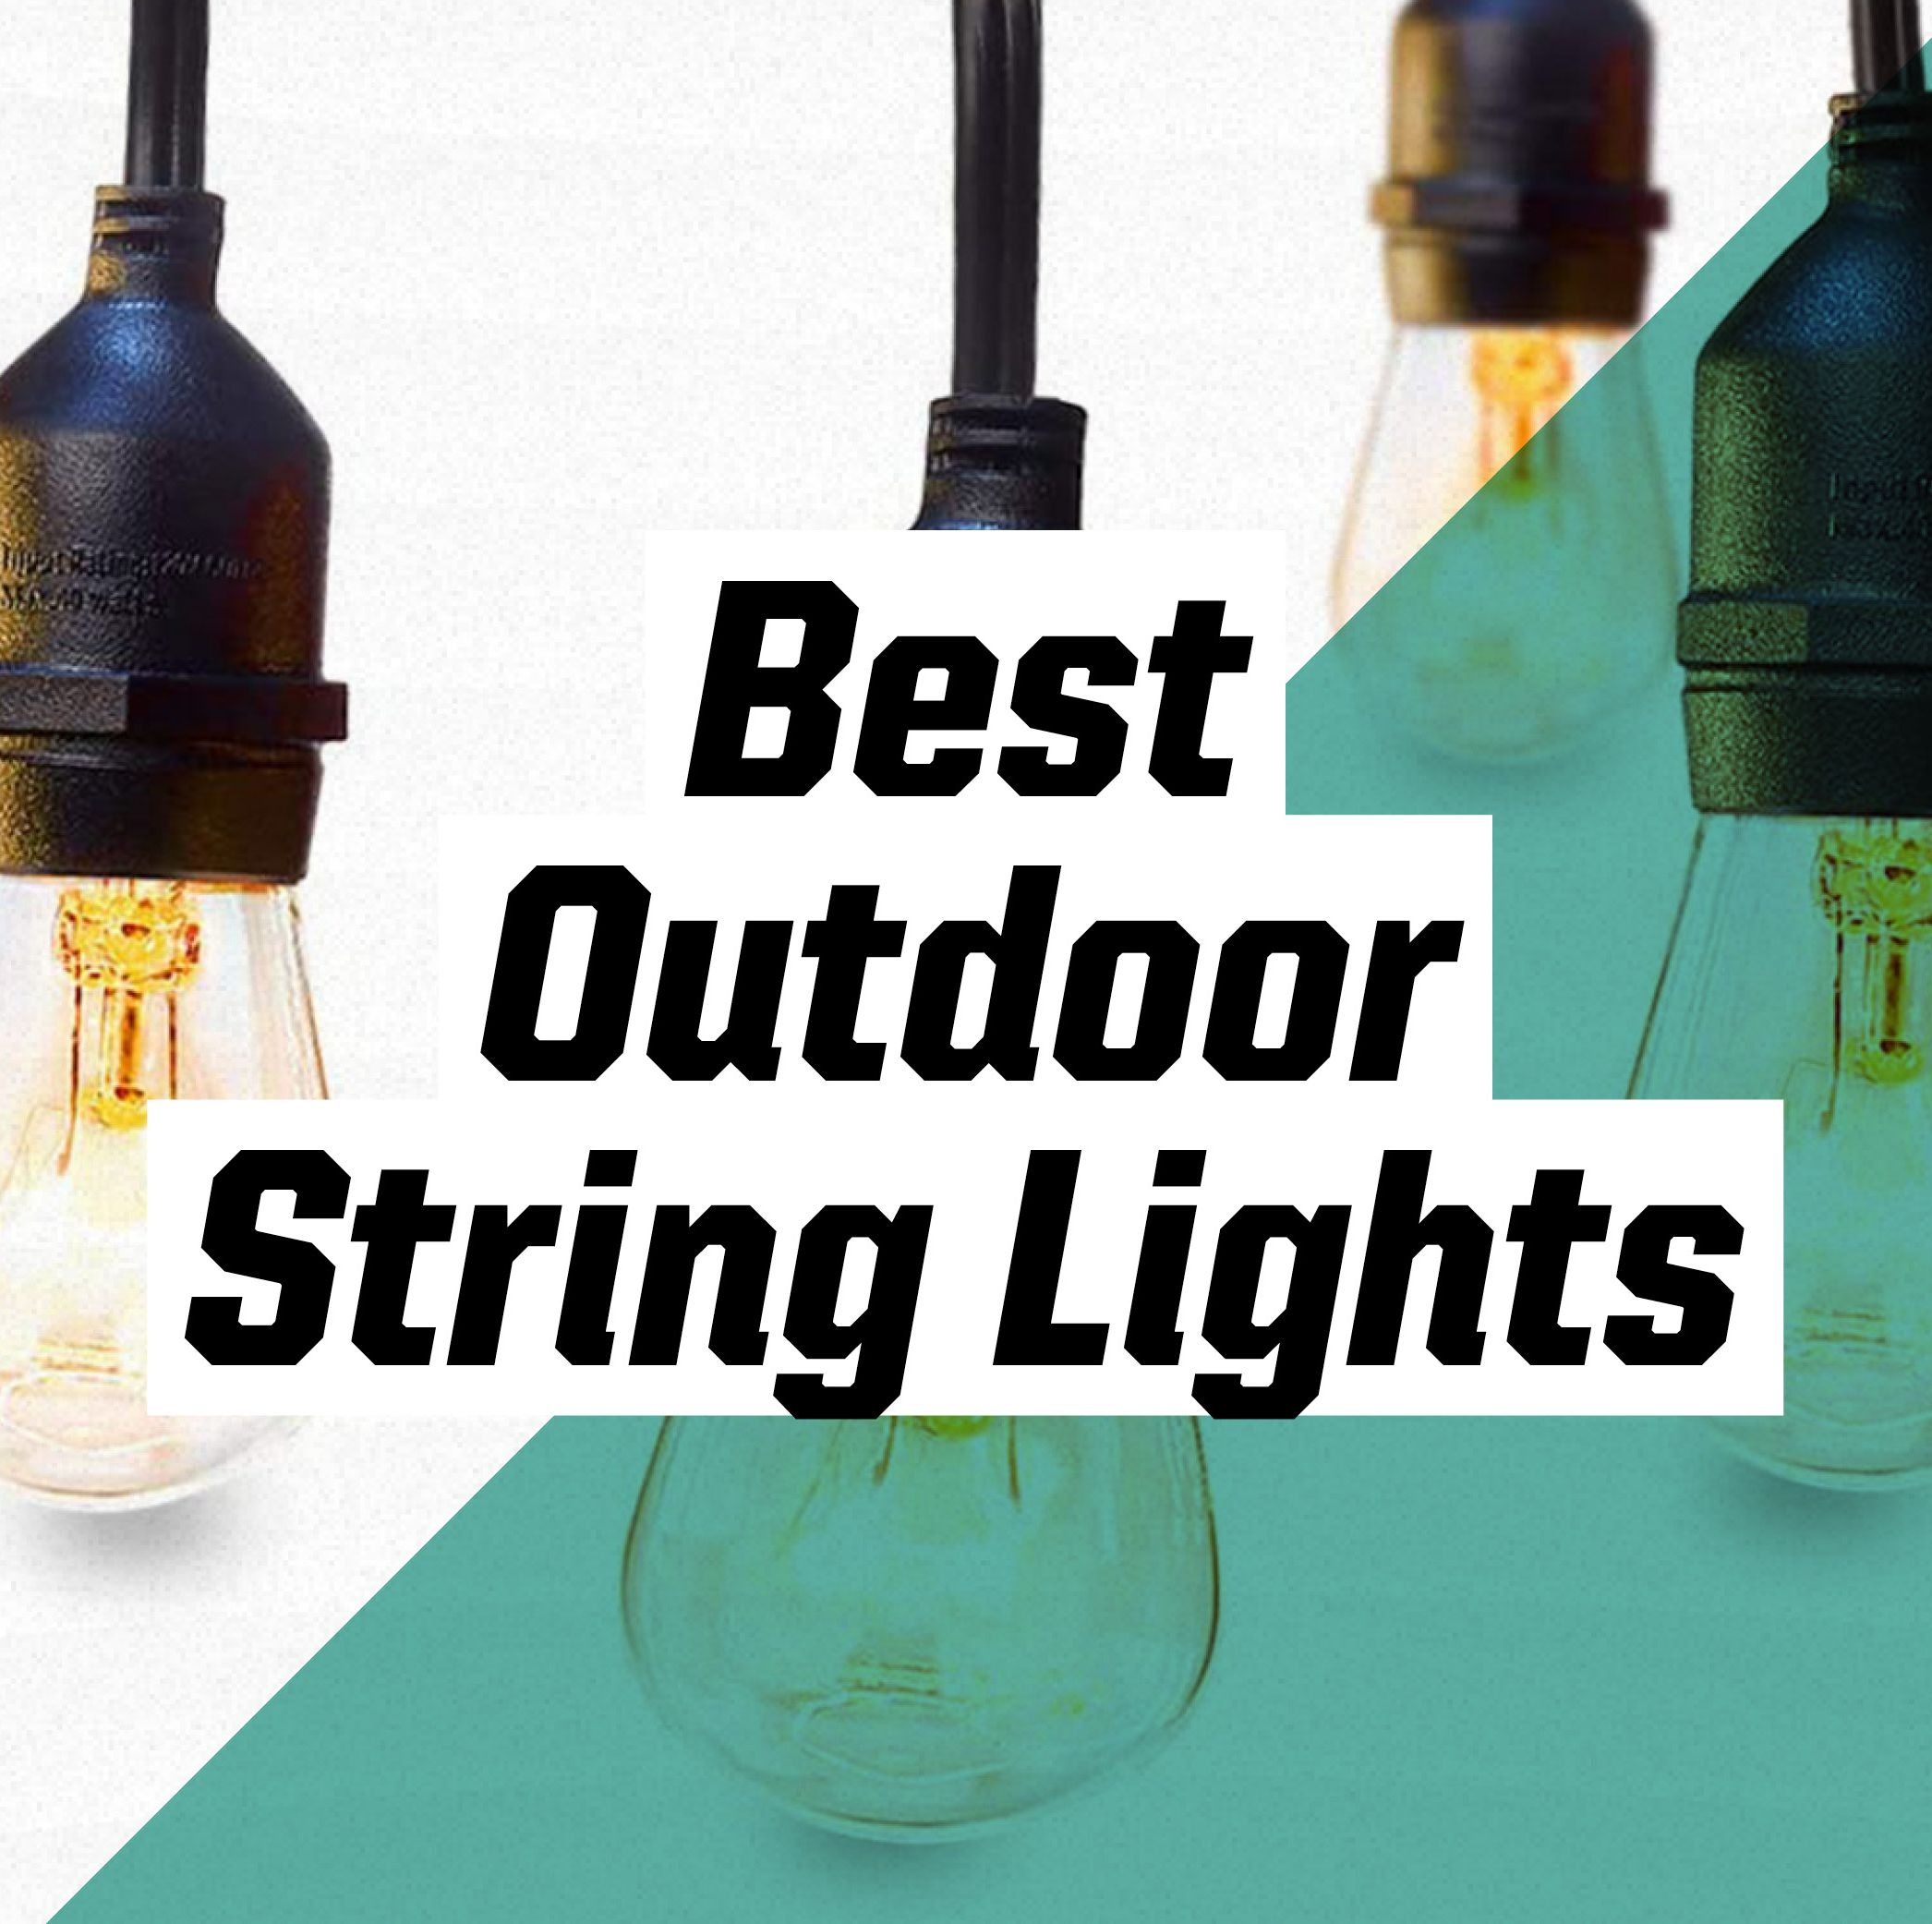 The Best Outdoor String Lights for Adding Festive Vibes to Your Backyard